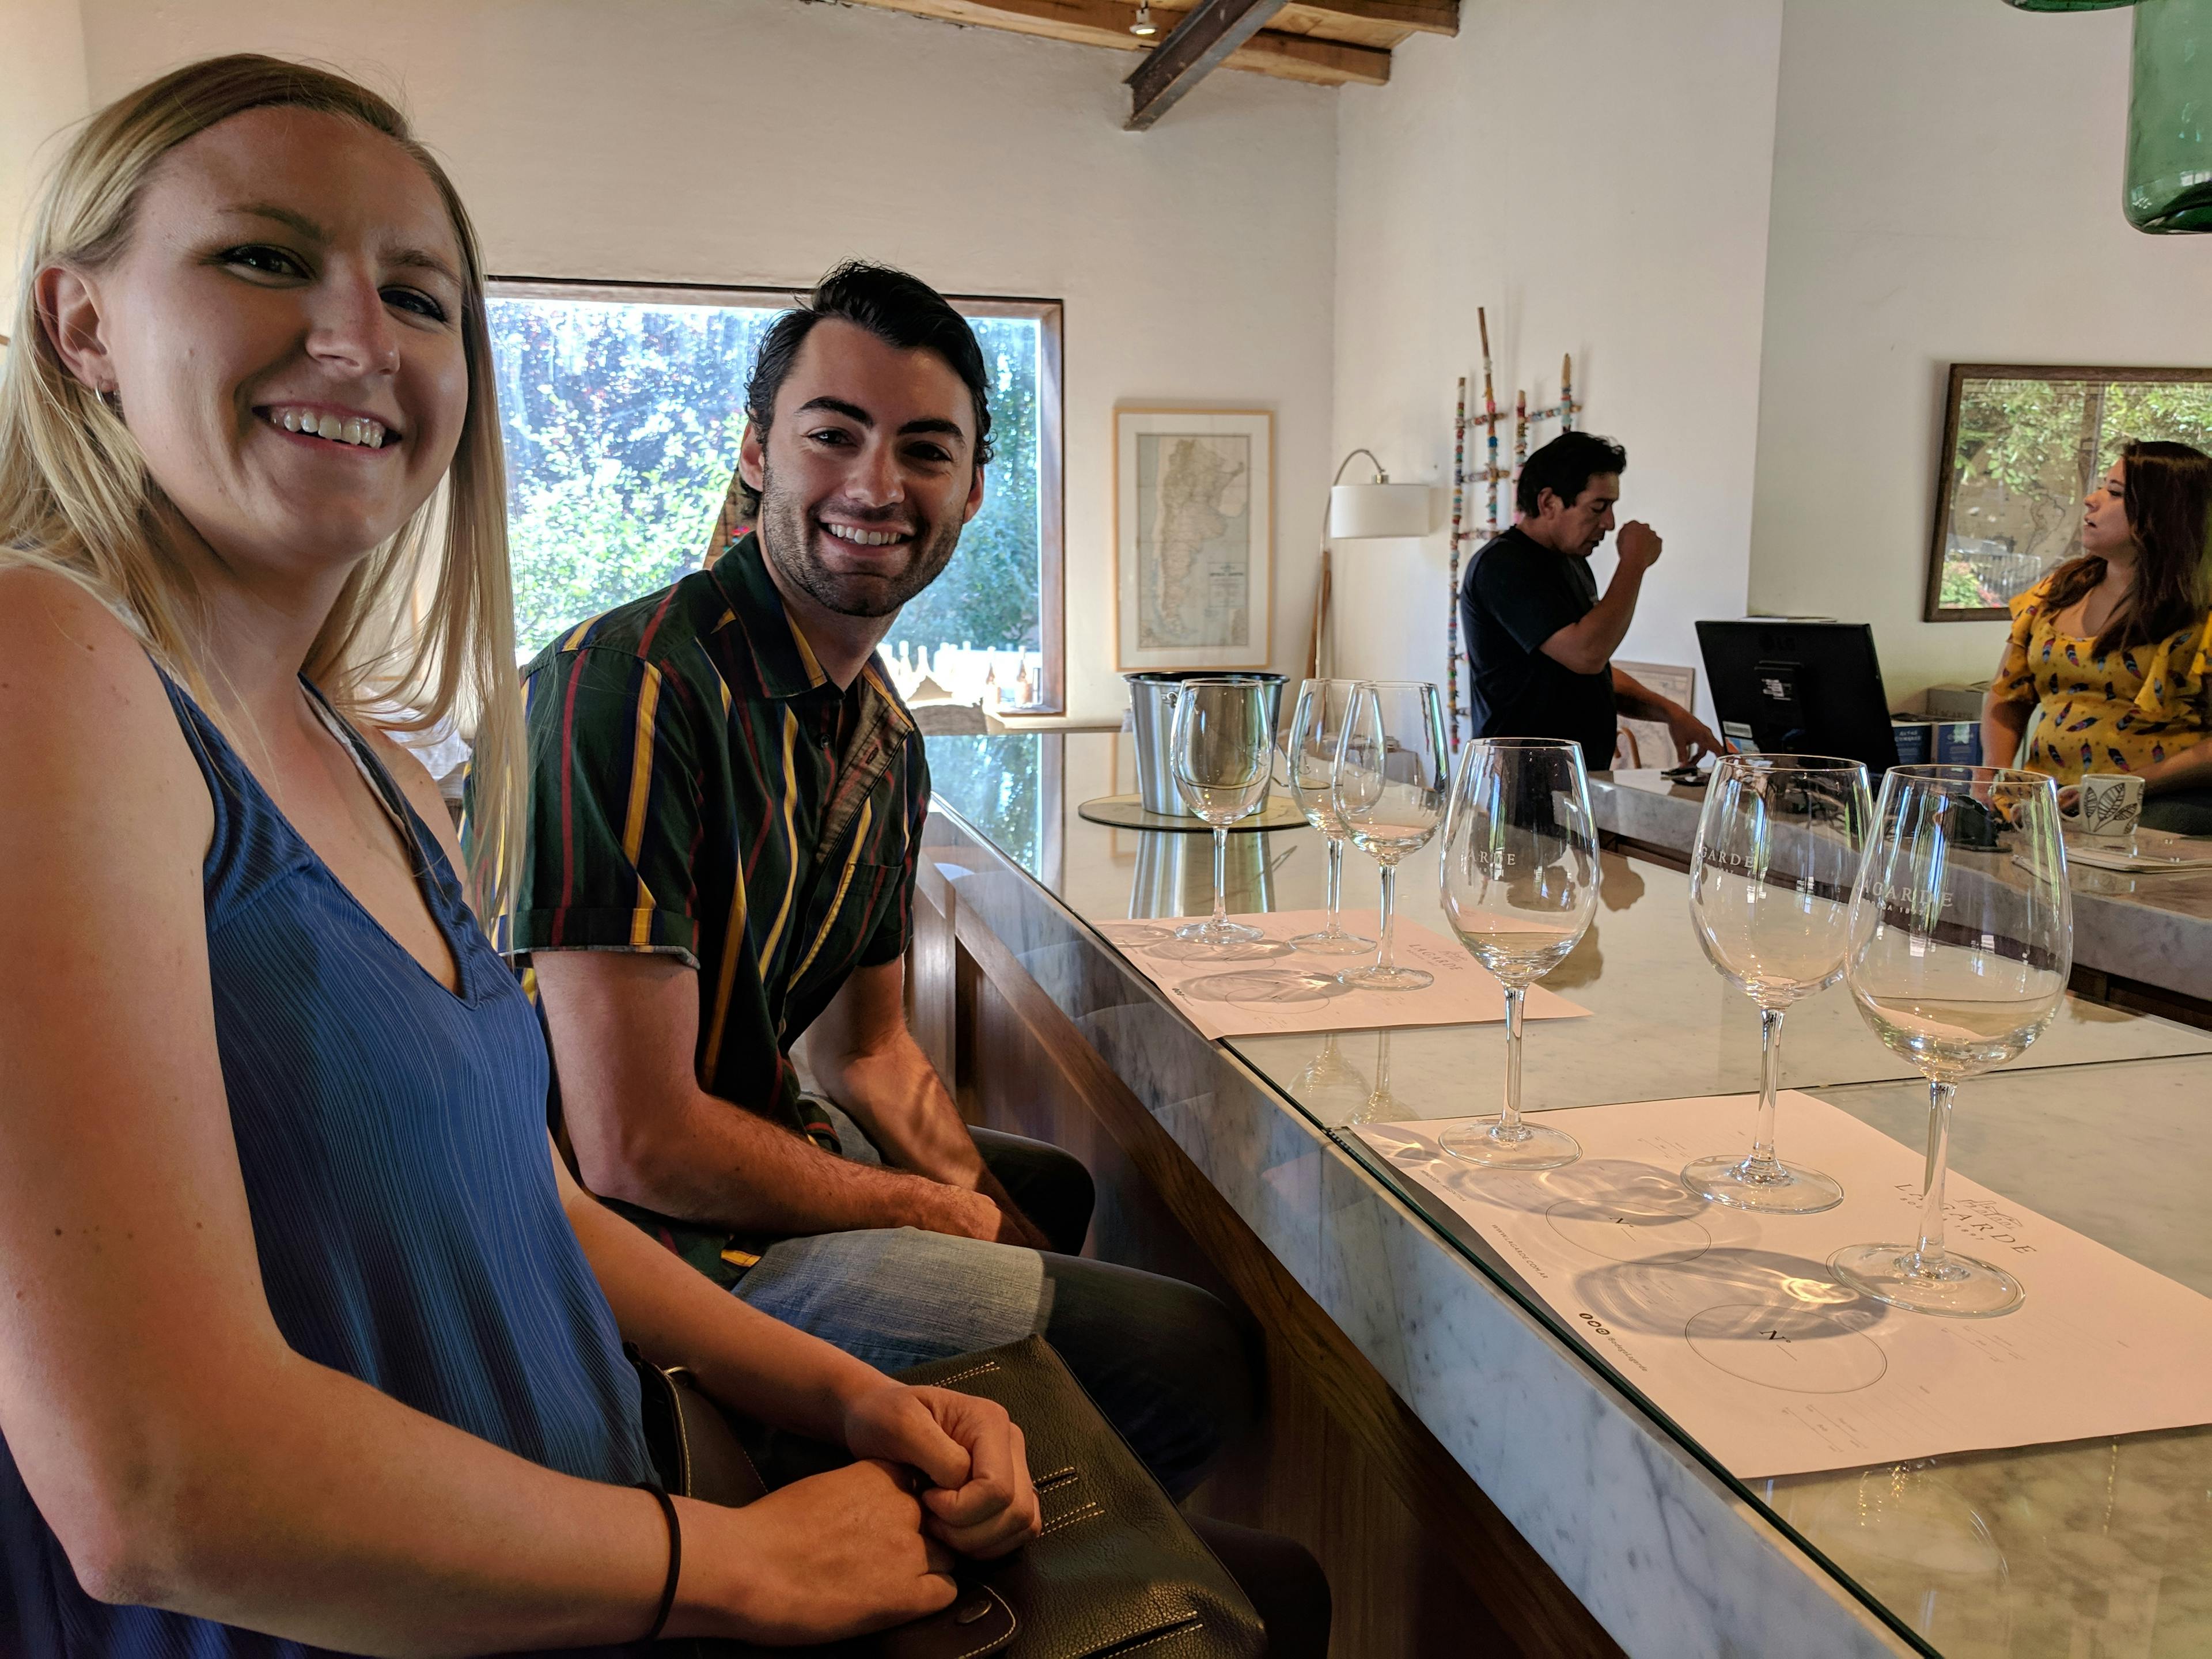 Our first wine tasting at Bodega Lagarde